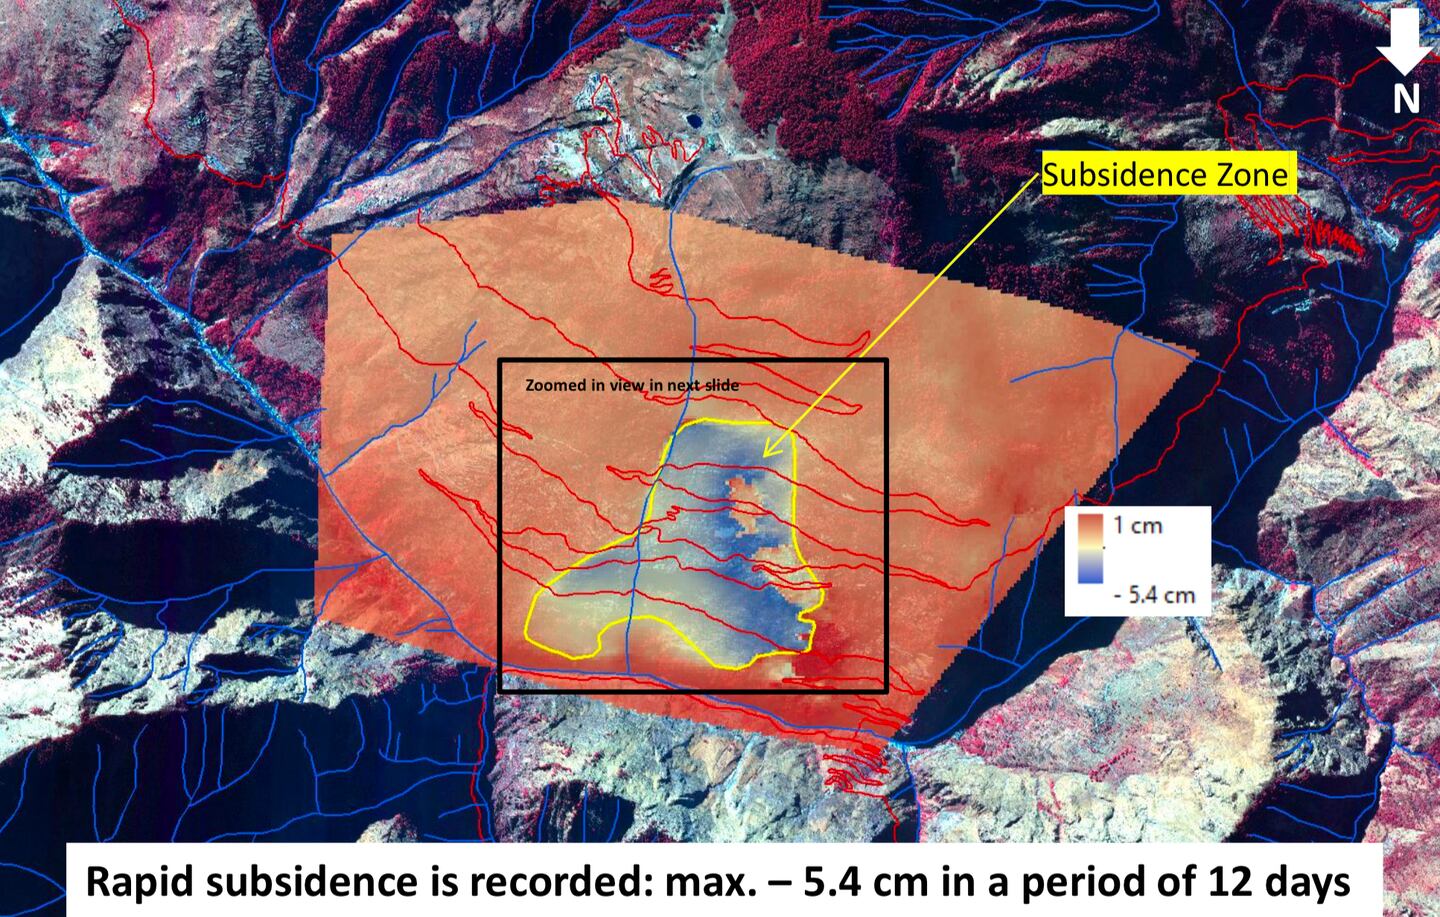 Satellite images show Joshimath sank by 5.4cm between December 27 and January 8. The red lines are roads and blue lines show drainage channels. Photo: ISRO